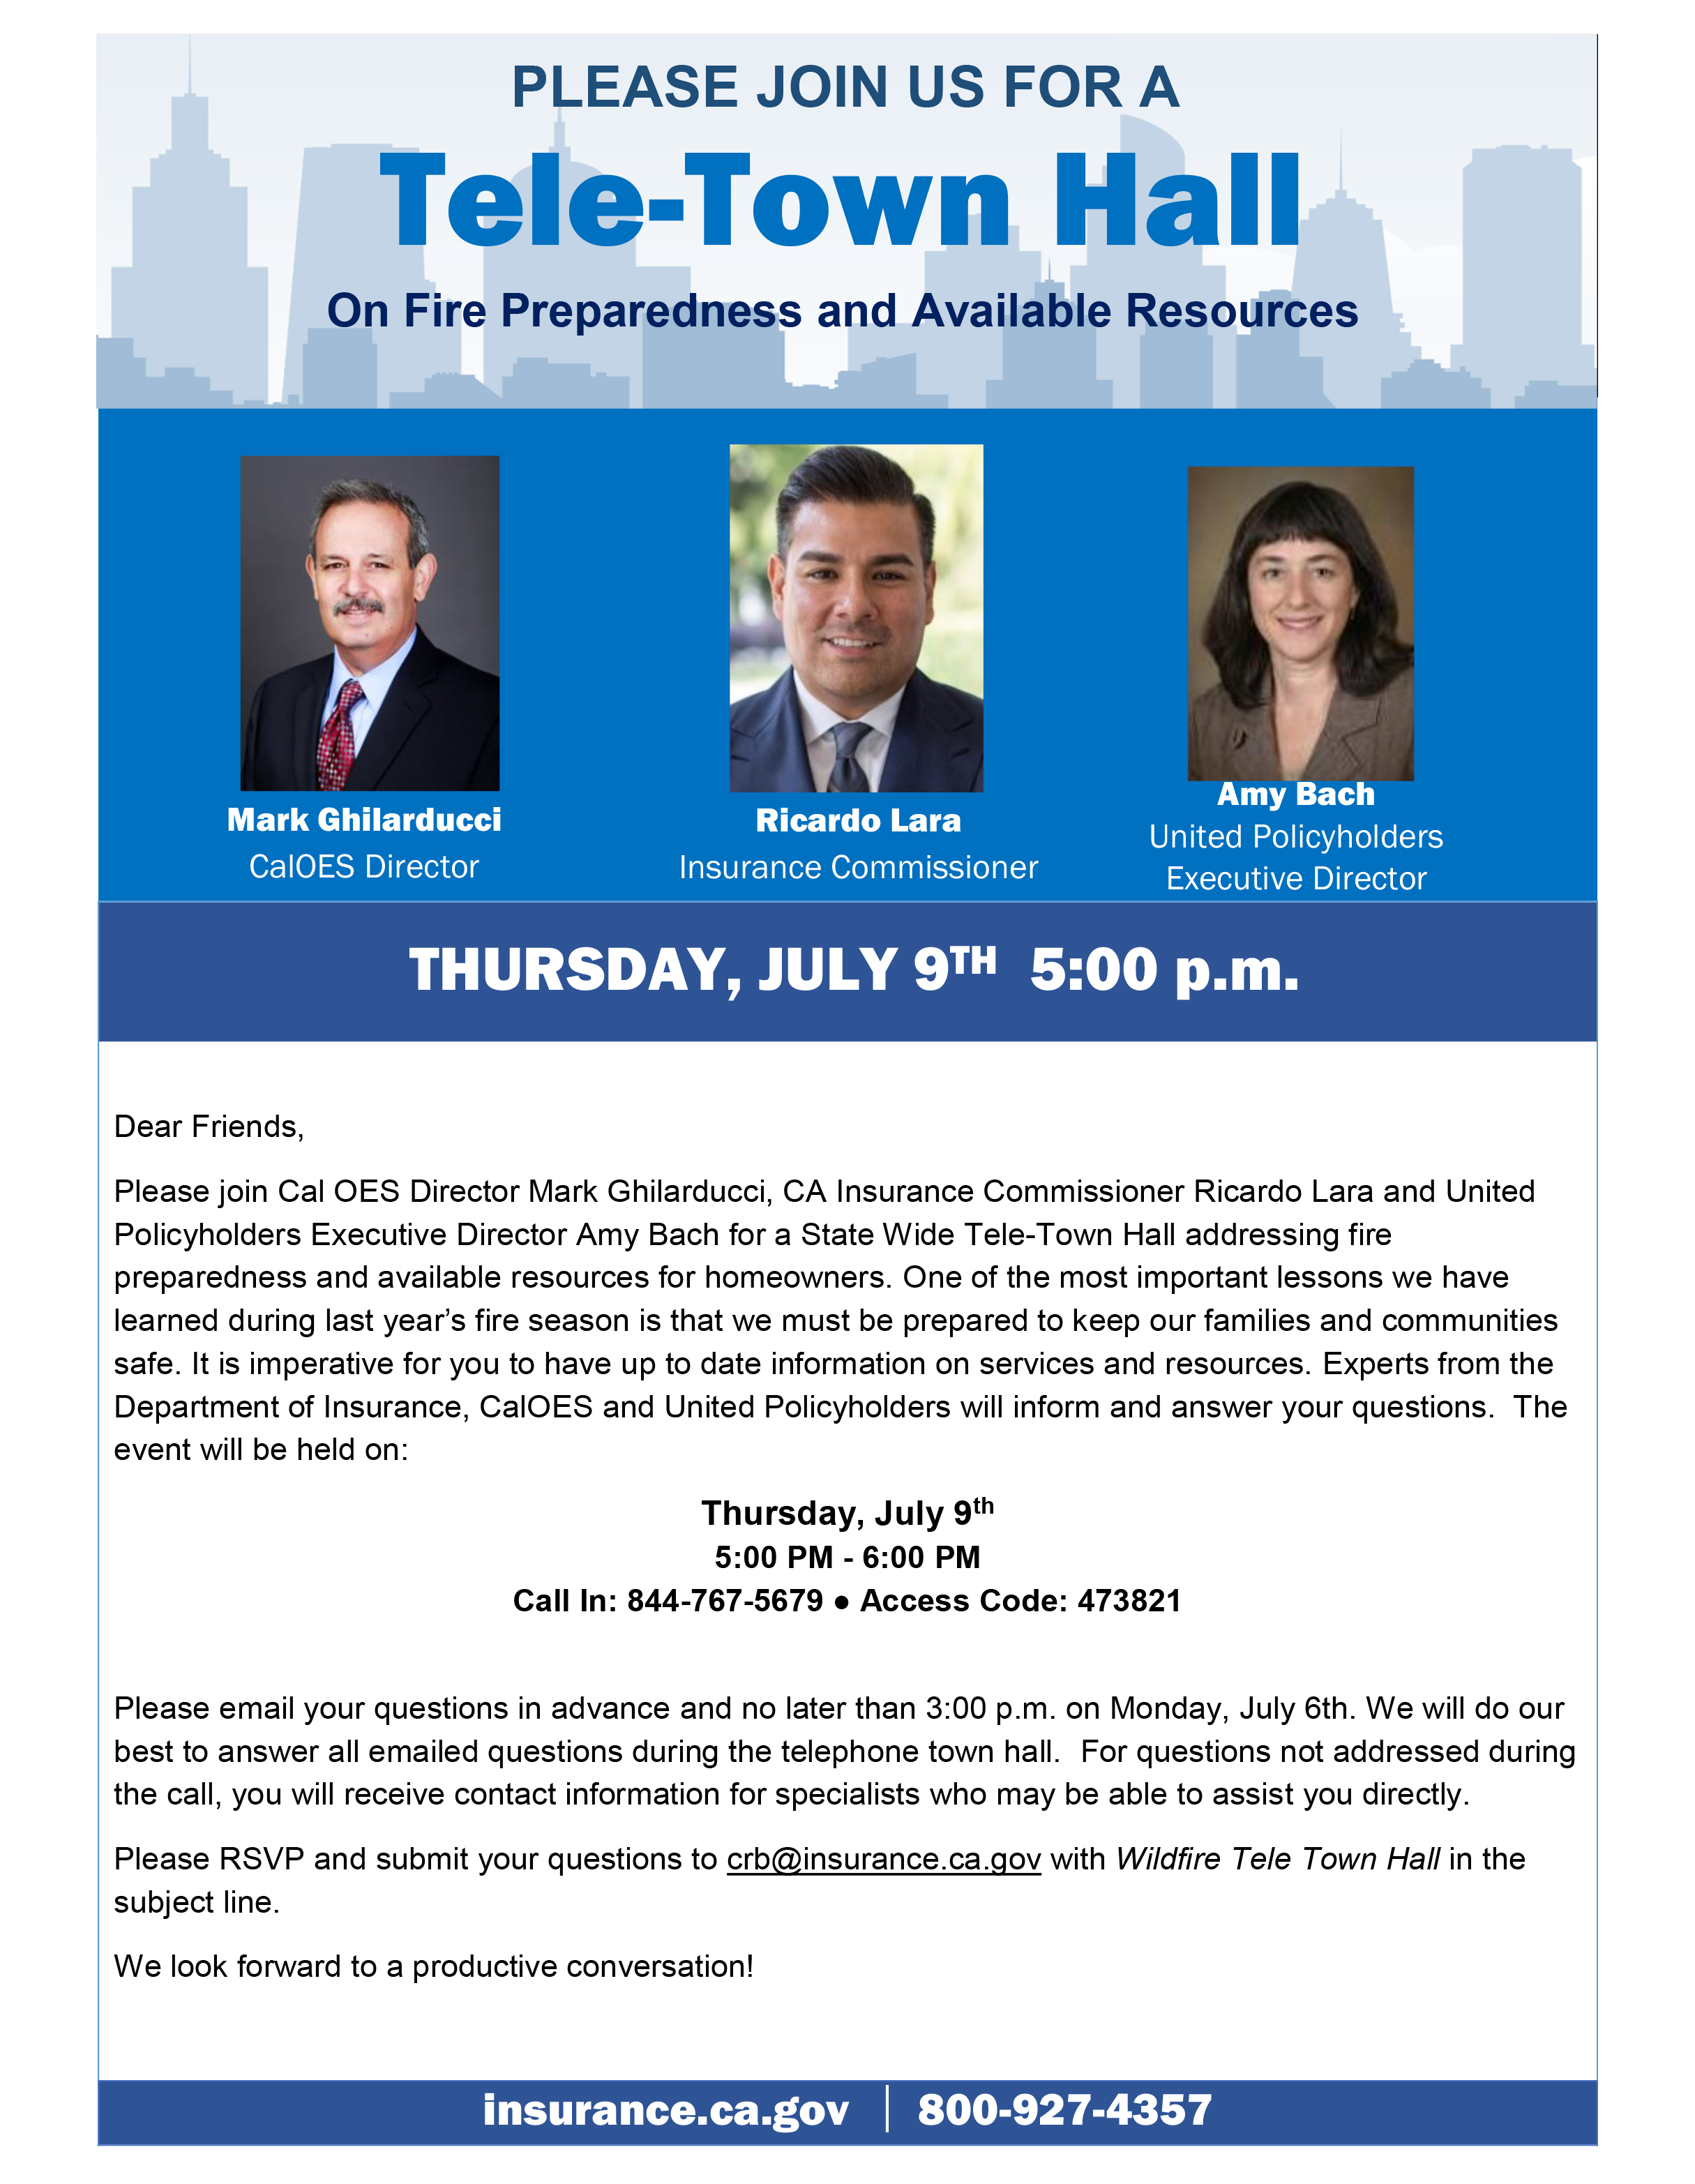 Please join Cal OES, Director Mark Ghilarducci, CA Insurance Commissioner Ricardo Lara and United Policyholders Executive Director Amy Bach for a State Wide Tele-Town Hall addressing fire preparedness and available resources for homeowners. 